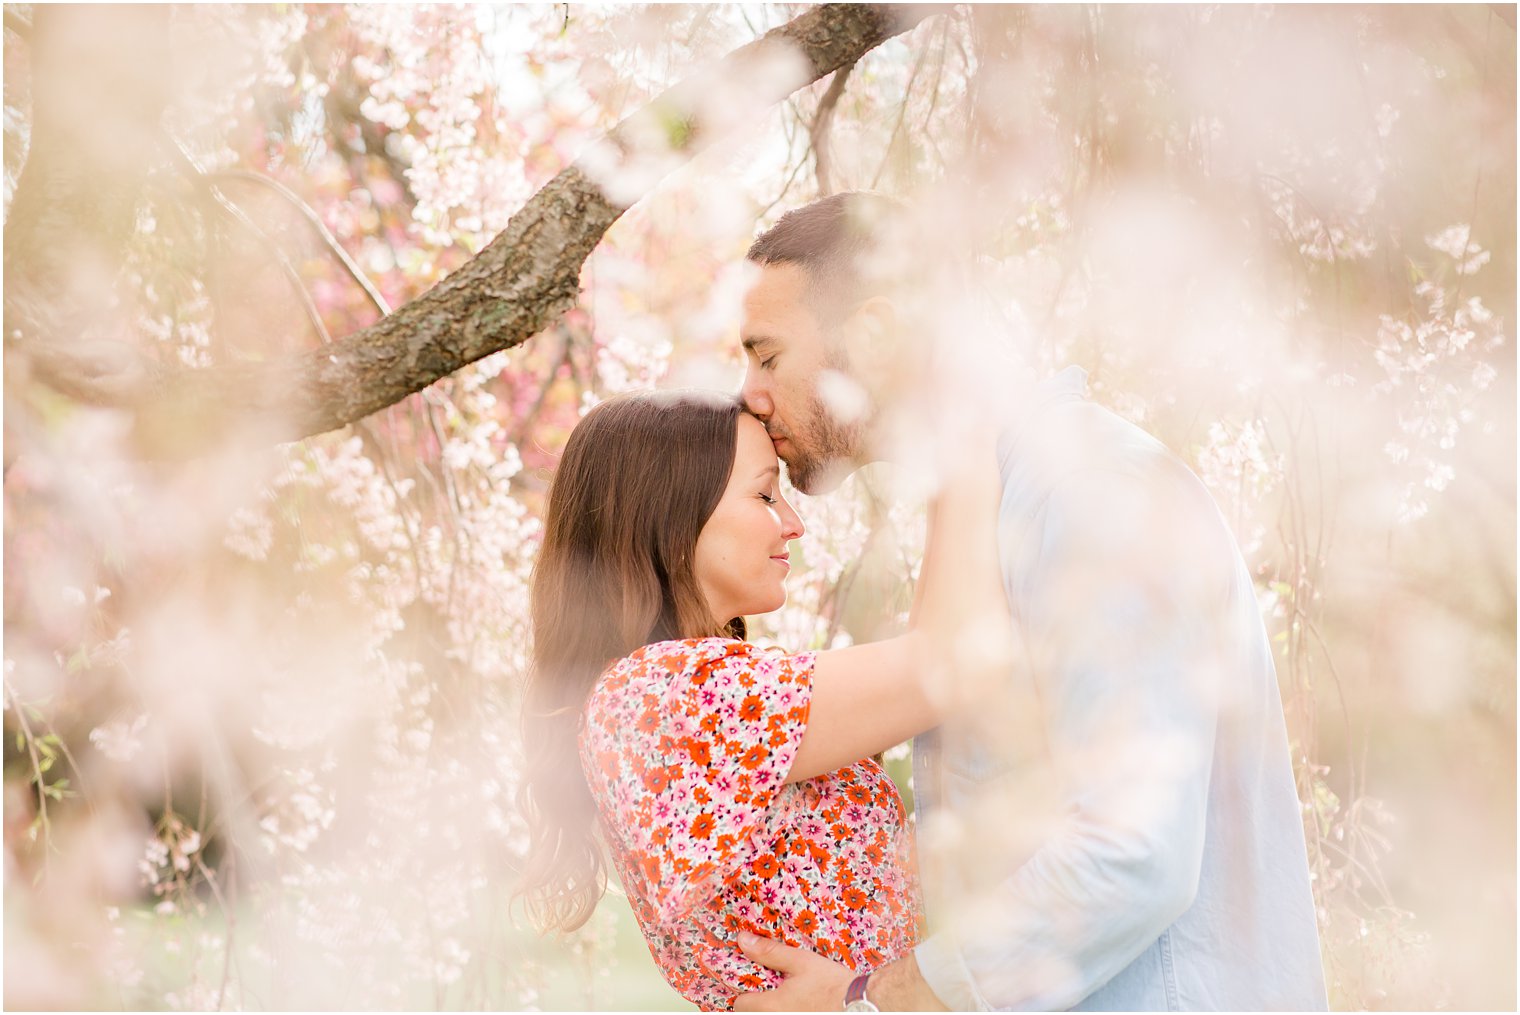 Engaged couple at Branch Brook Park in Newark NJ during cherry blossoms